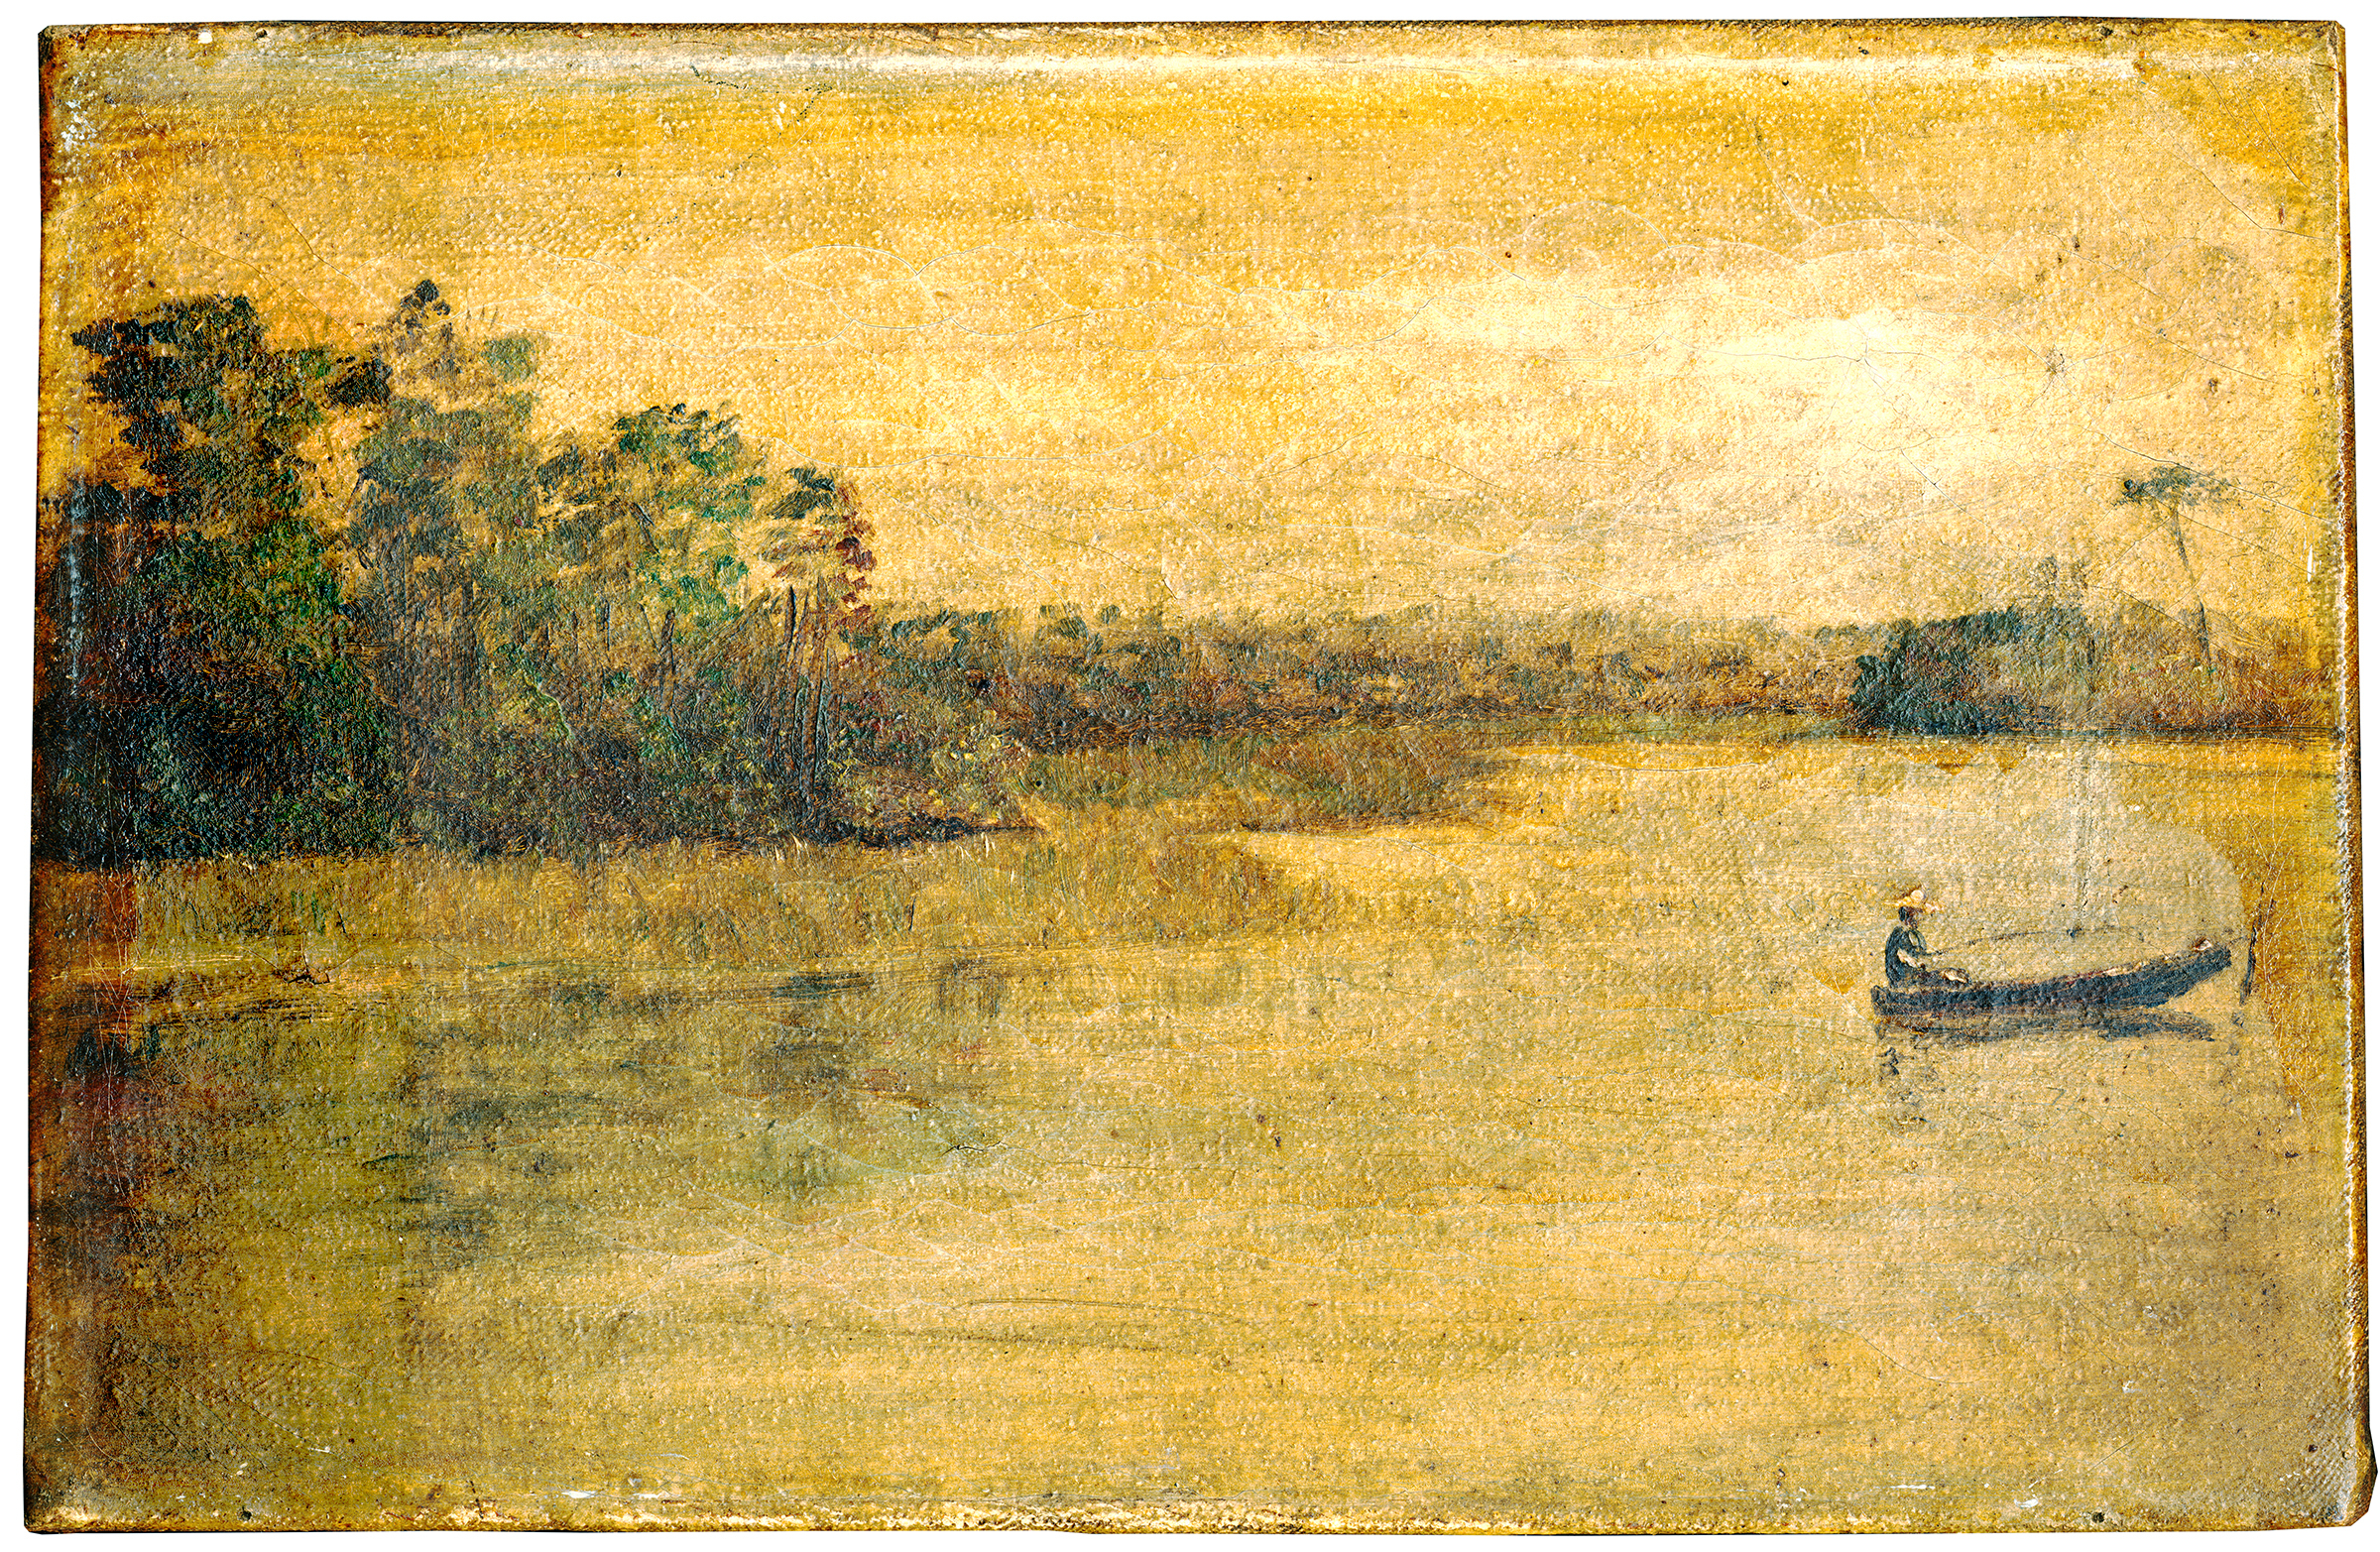 Pepperidge Point at Long Pond in Greenbelt, circa 1910, painted by Lafayette Laguire.